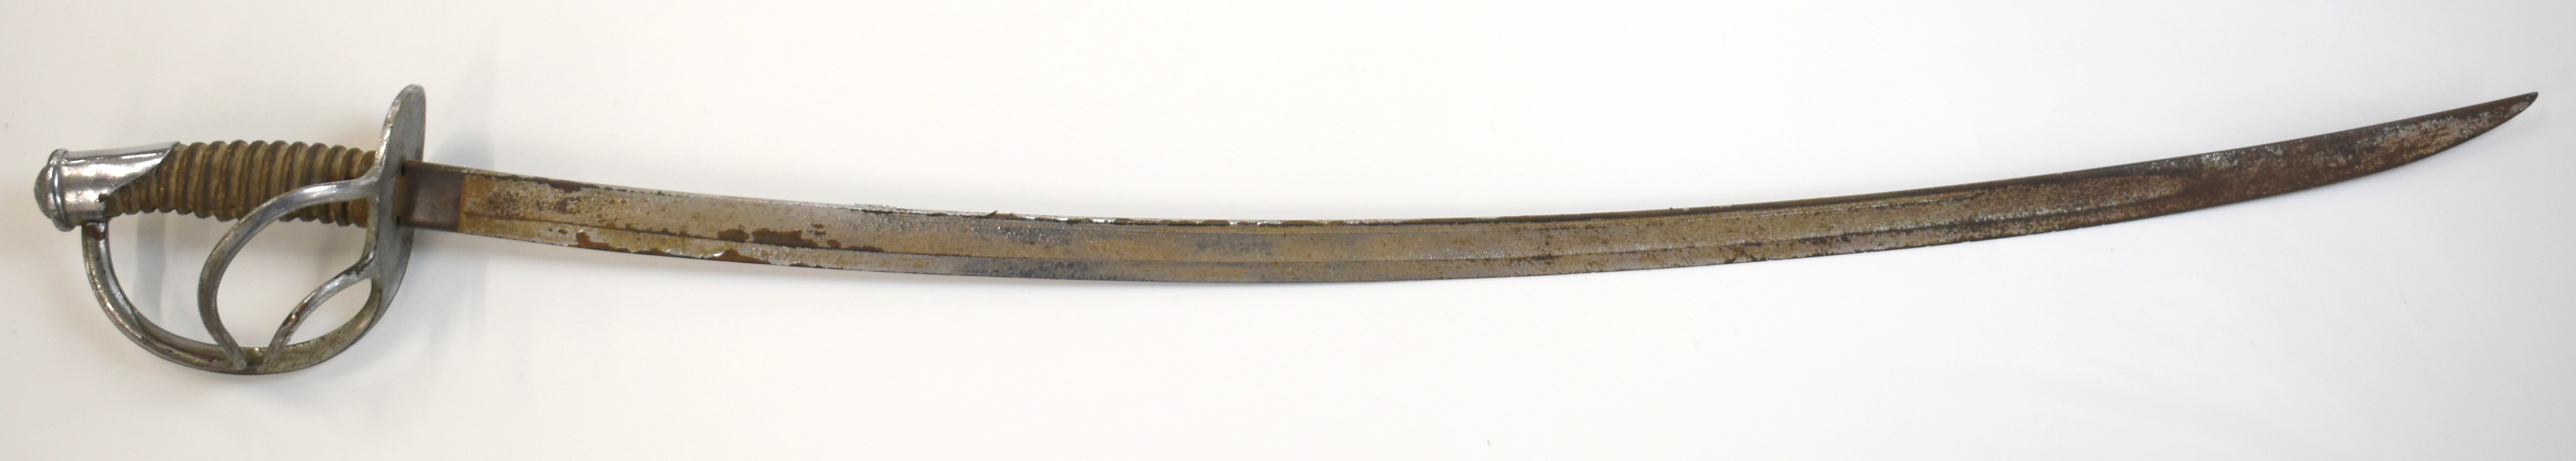 American Civil War sword with wooden grip, two bar hilt, US 1864 AGM to ricasso and Crosby - Image 6 of 26